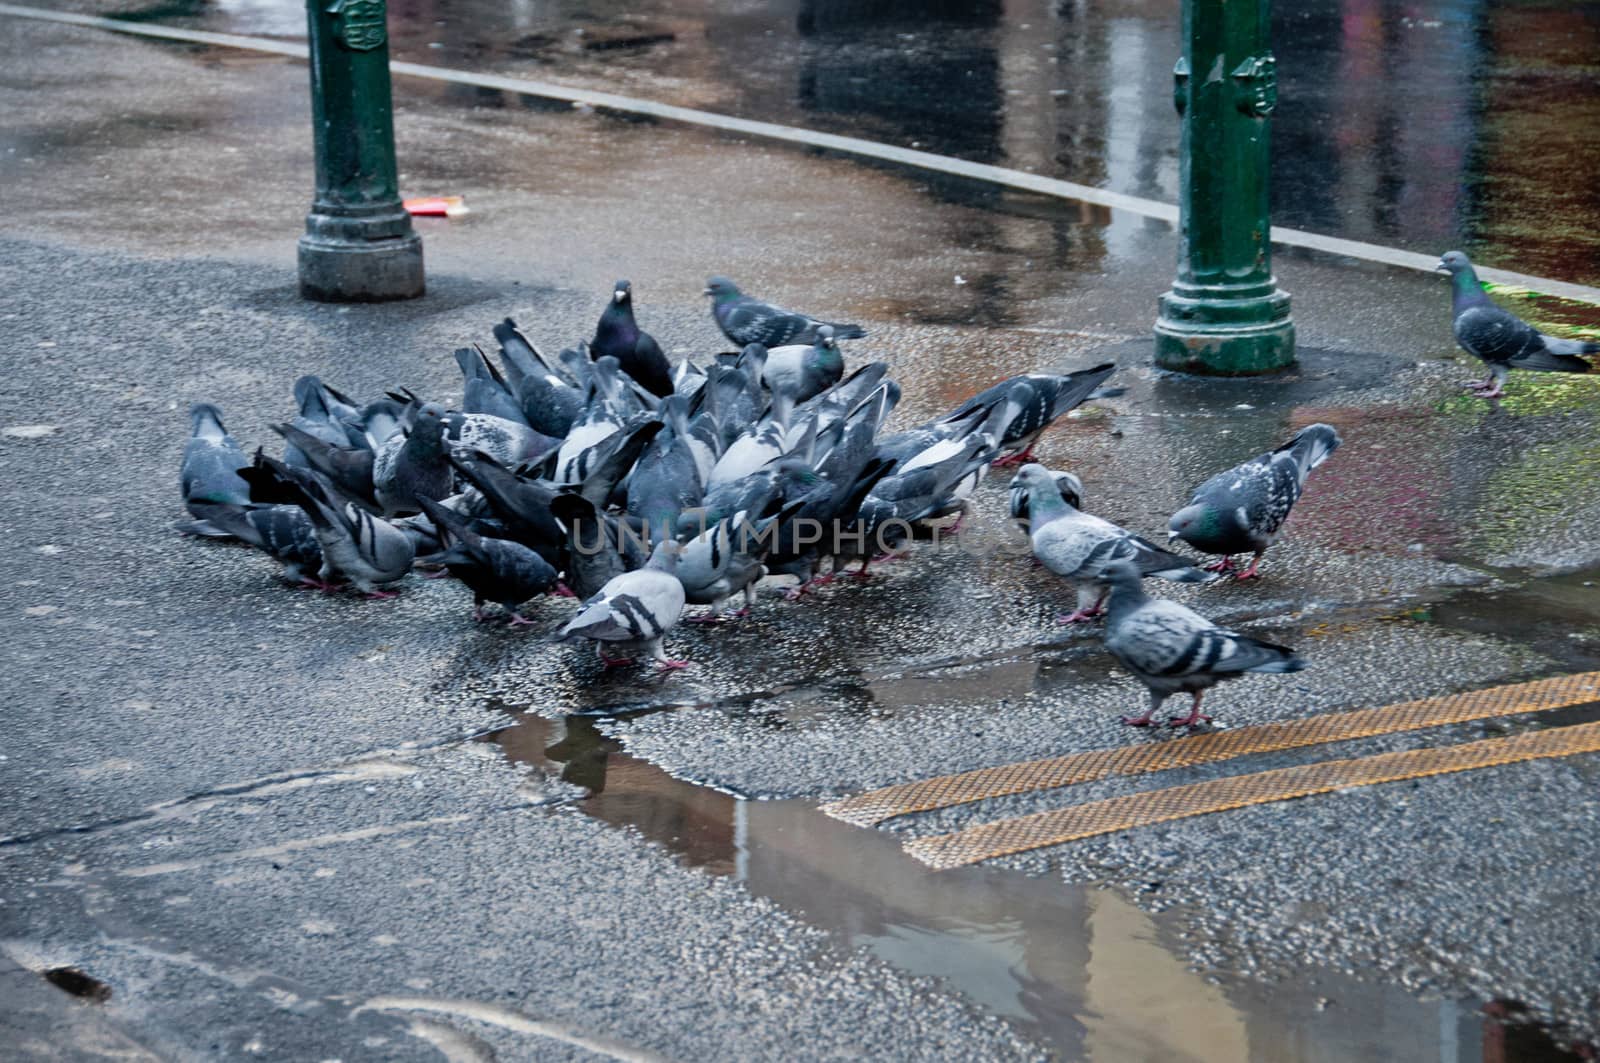 Group of Pigeons eating bird food on a street in rainy day in ci by eyeofpaul